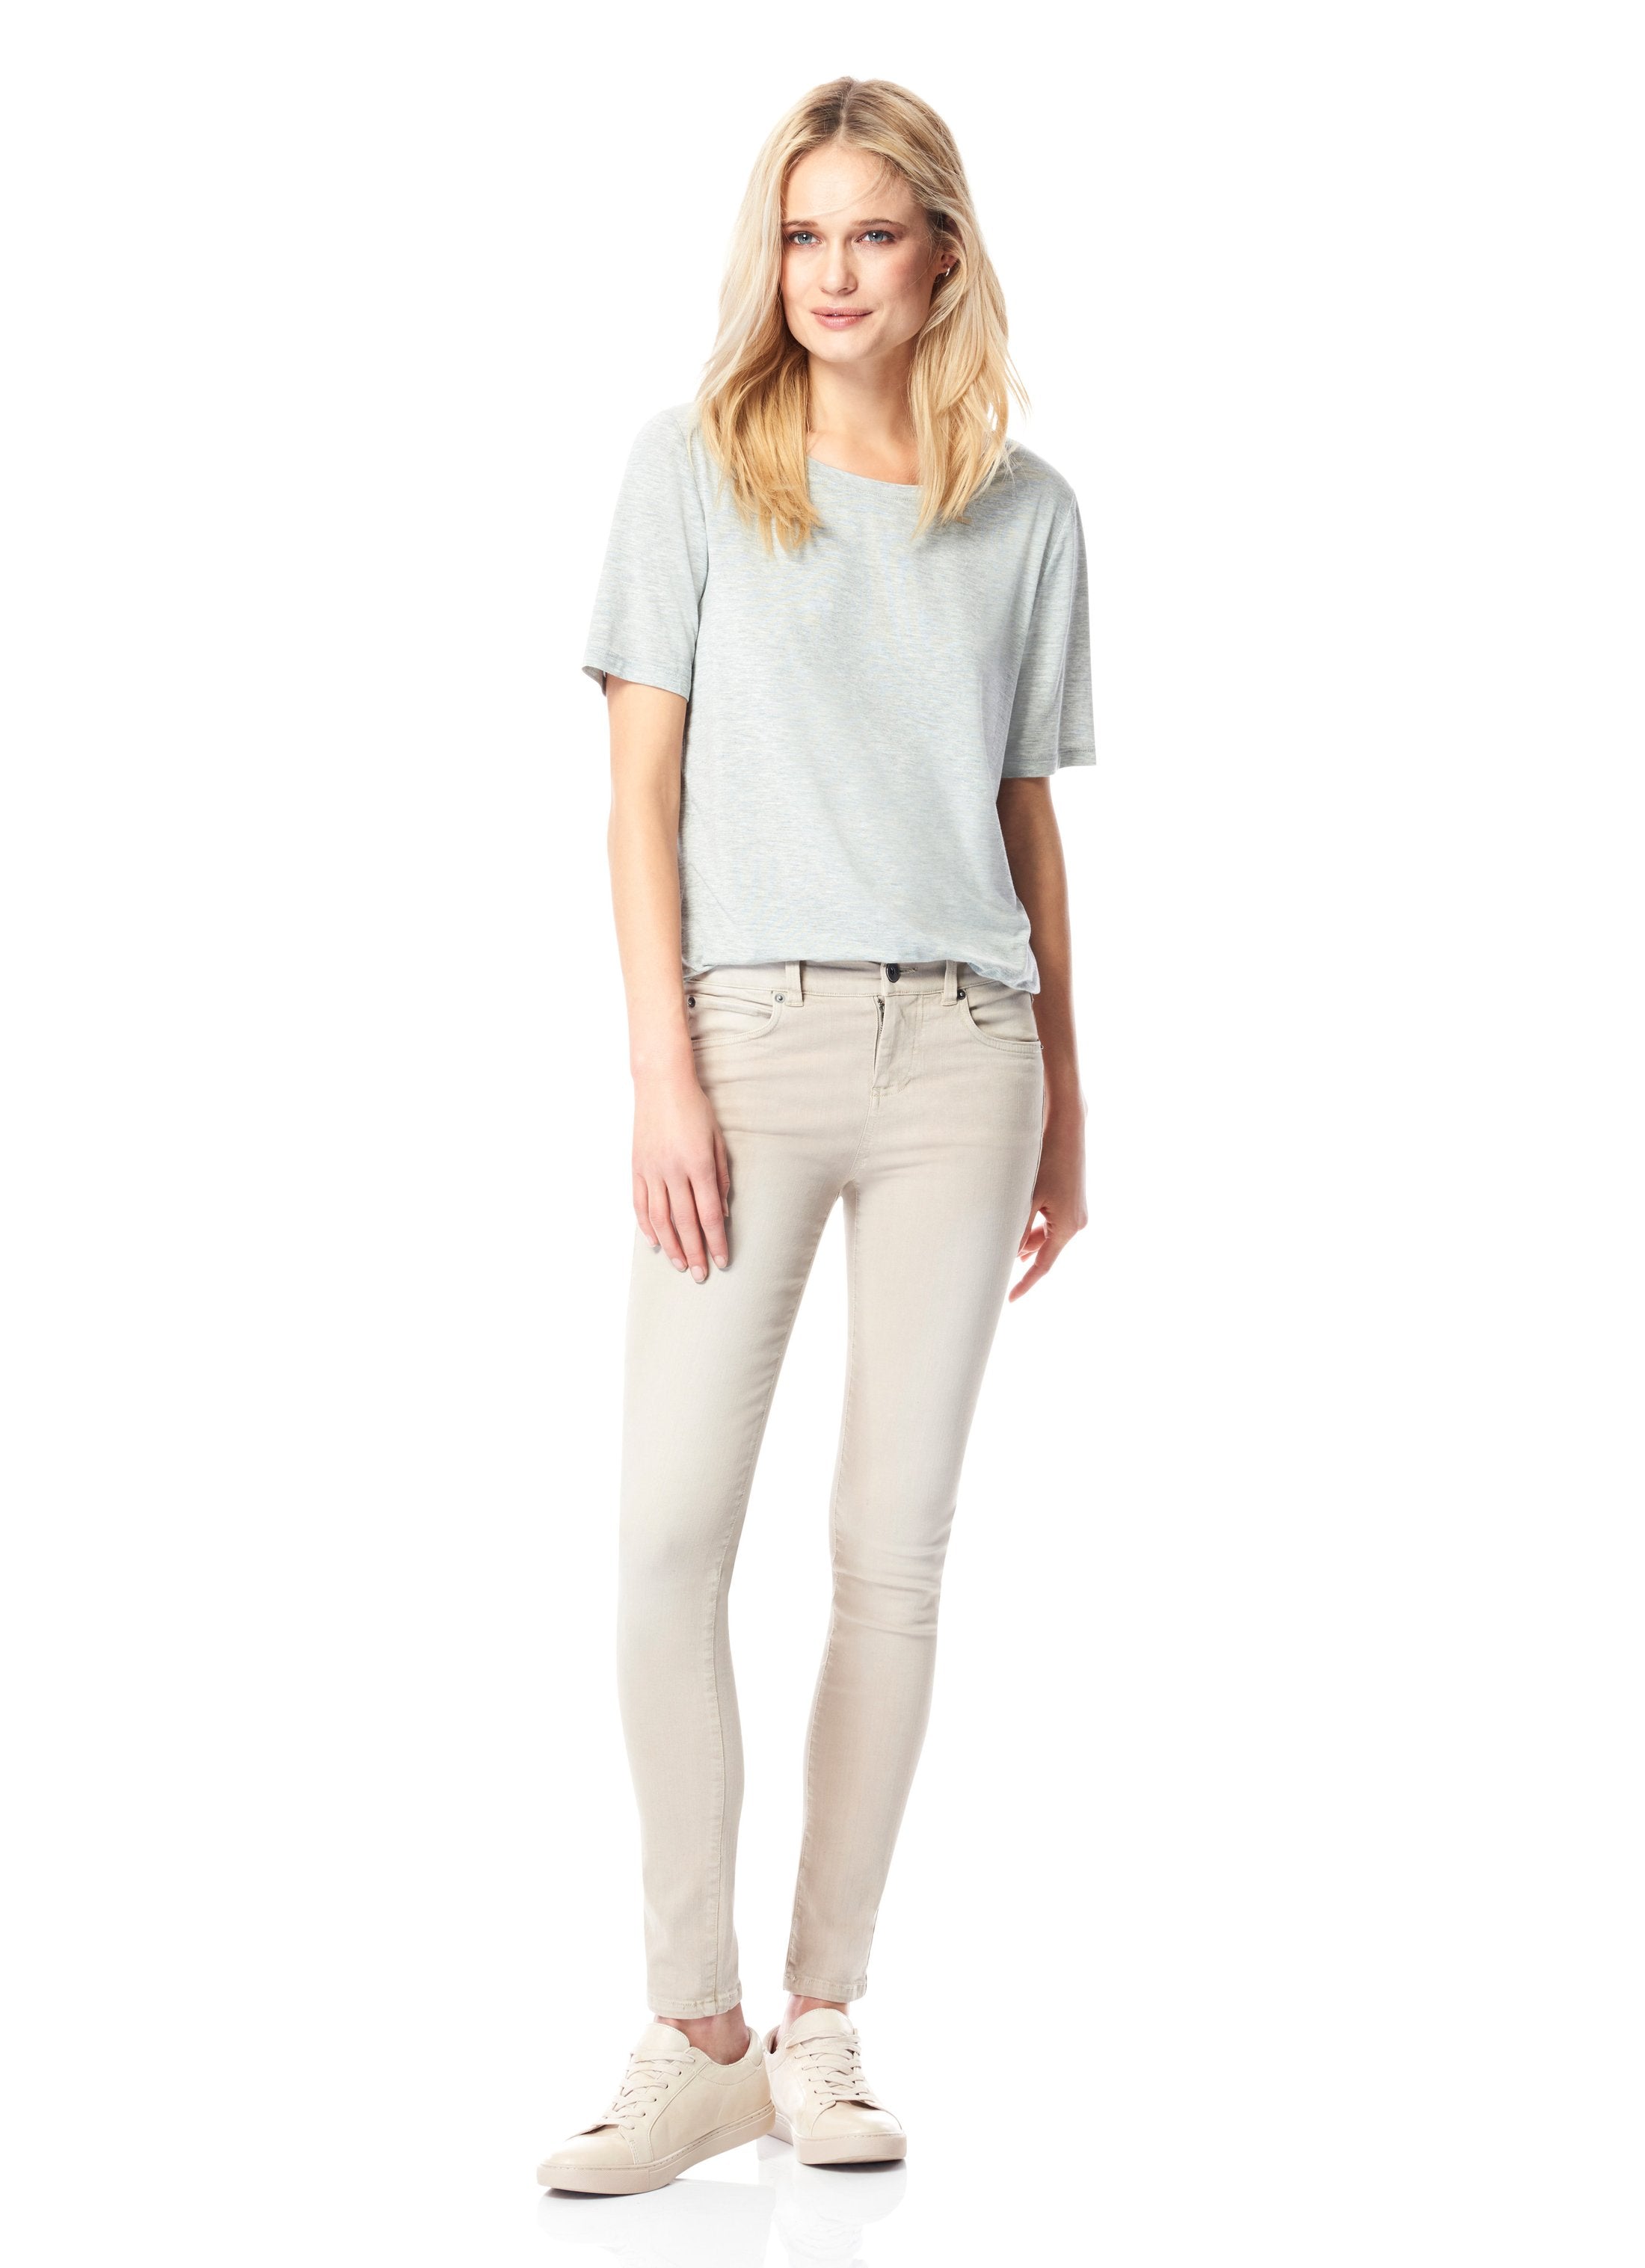 ECRU mid-rise straight leg jean in latte, found at Patricia in Southern Pines, NC